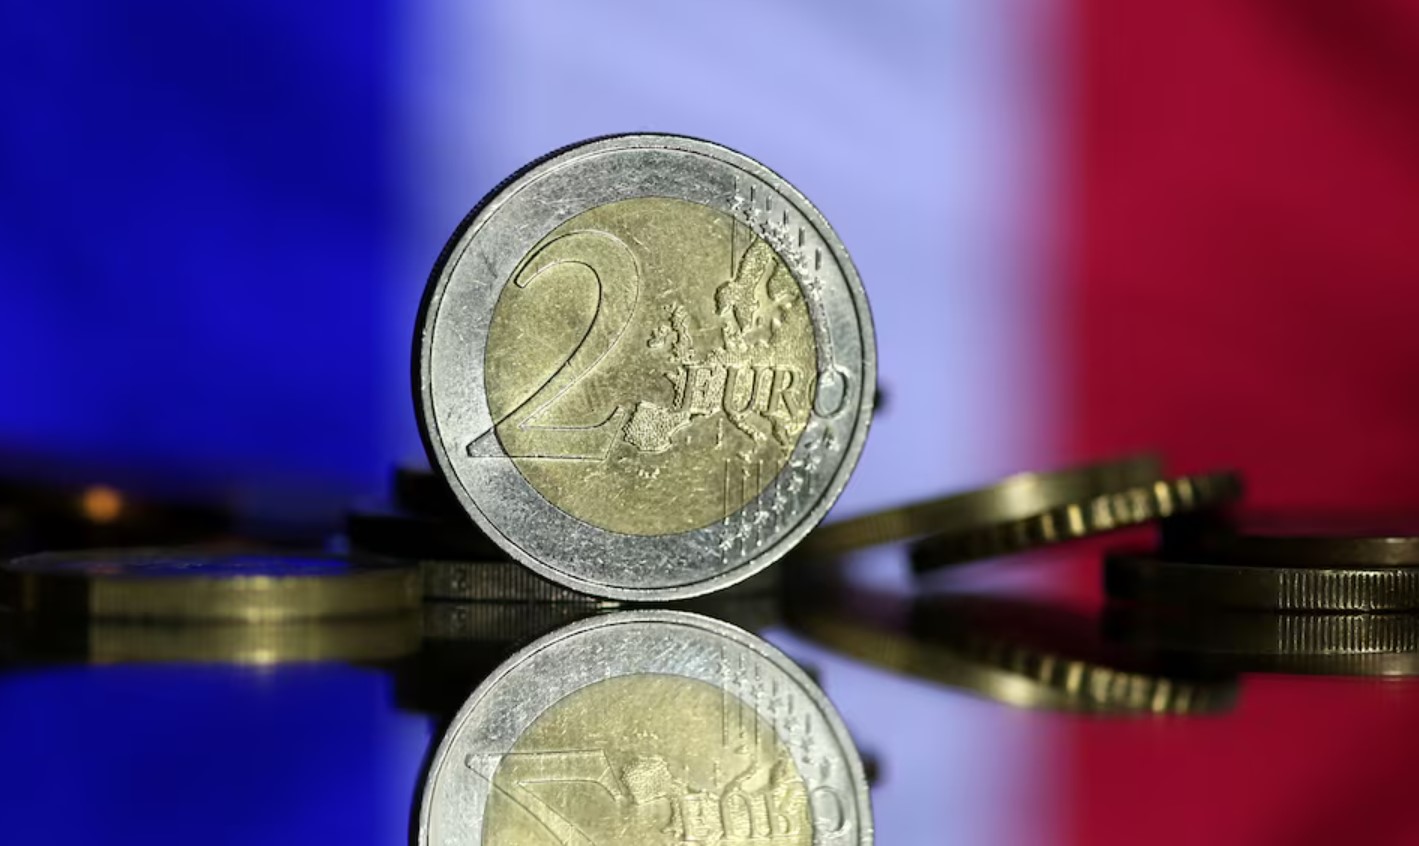 French election result spurs market volatility, Euro dips